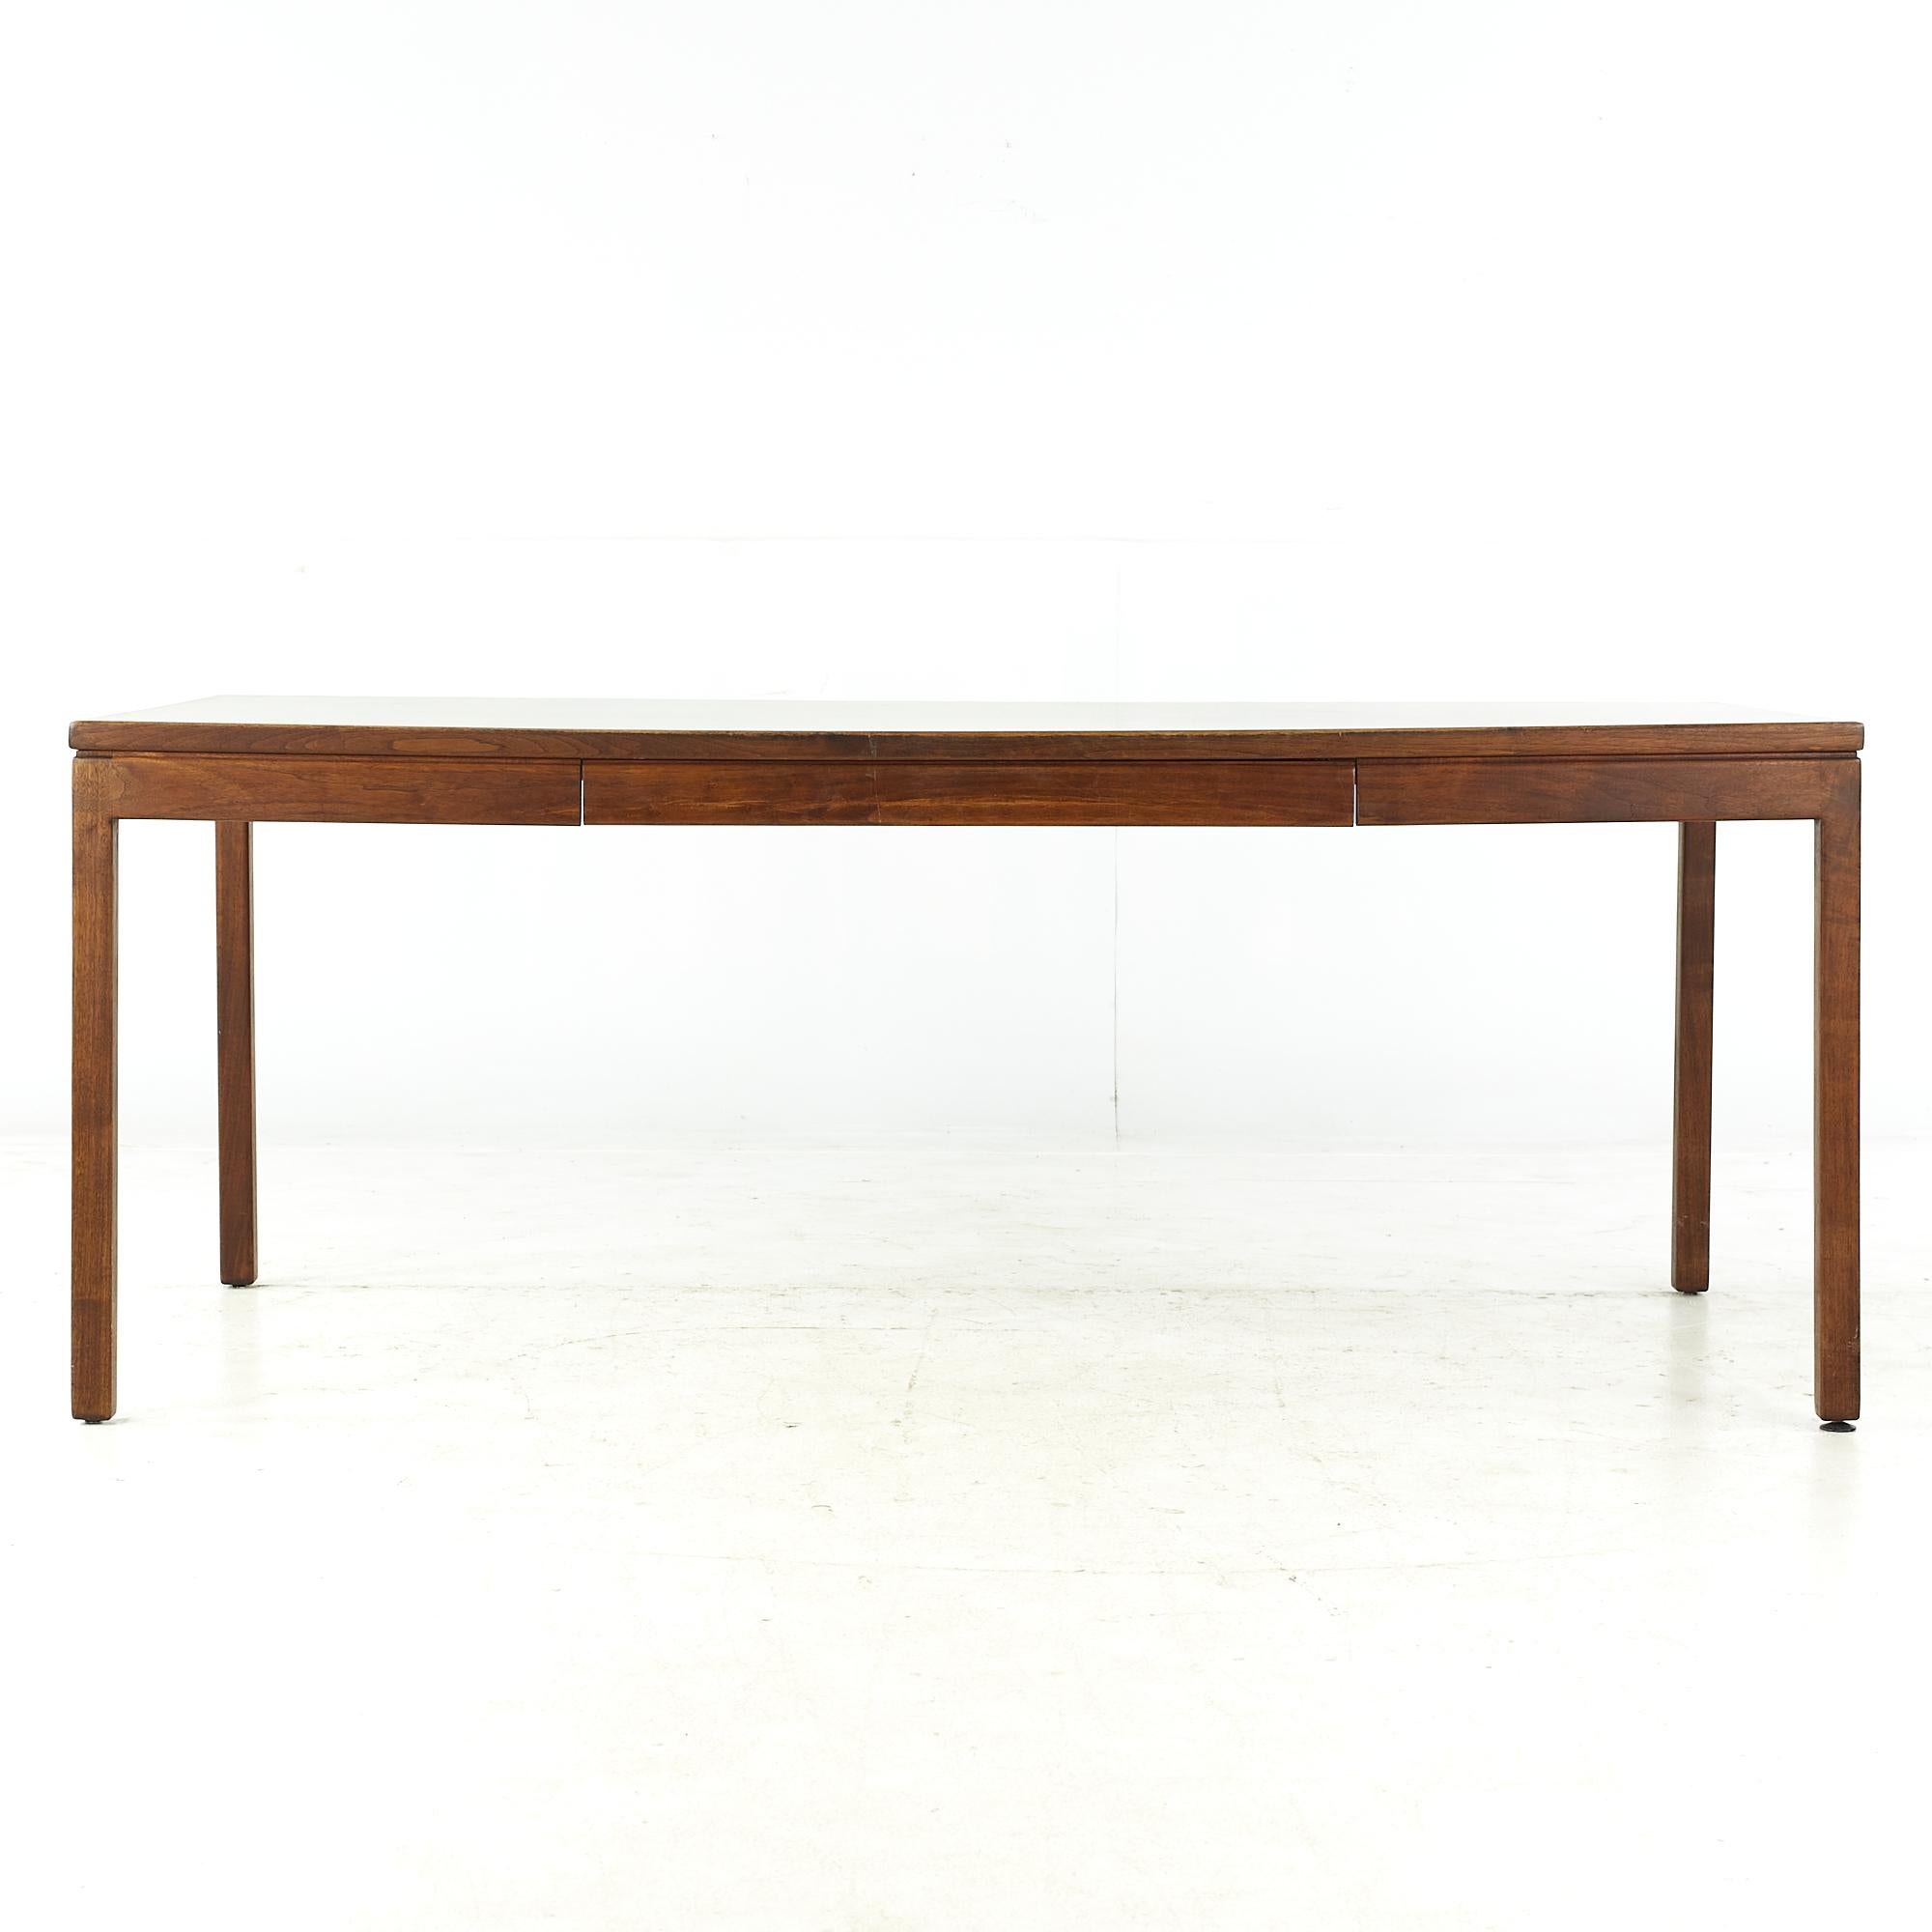 Jens Risom midcentury Walnut and Formica top writing desk

This desk measures: 72 wide x 35.25 deep x 28.5 high, with a chair clearance of 24.5 inches

All pieces of furniture can be had in what we call restored vintage condition. That means the